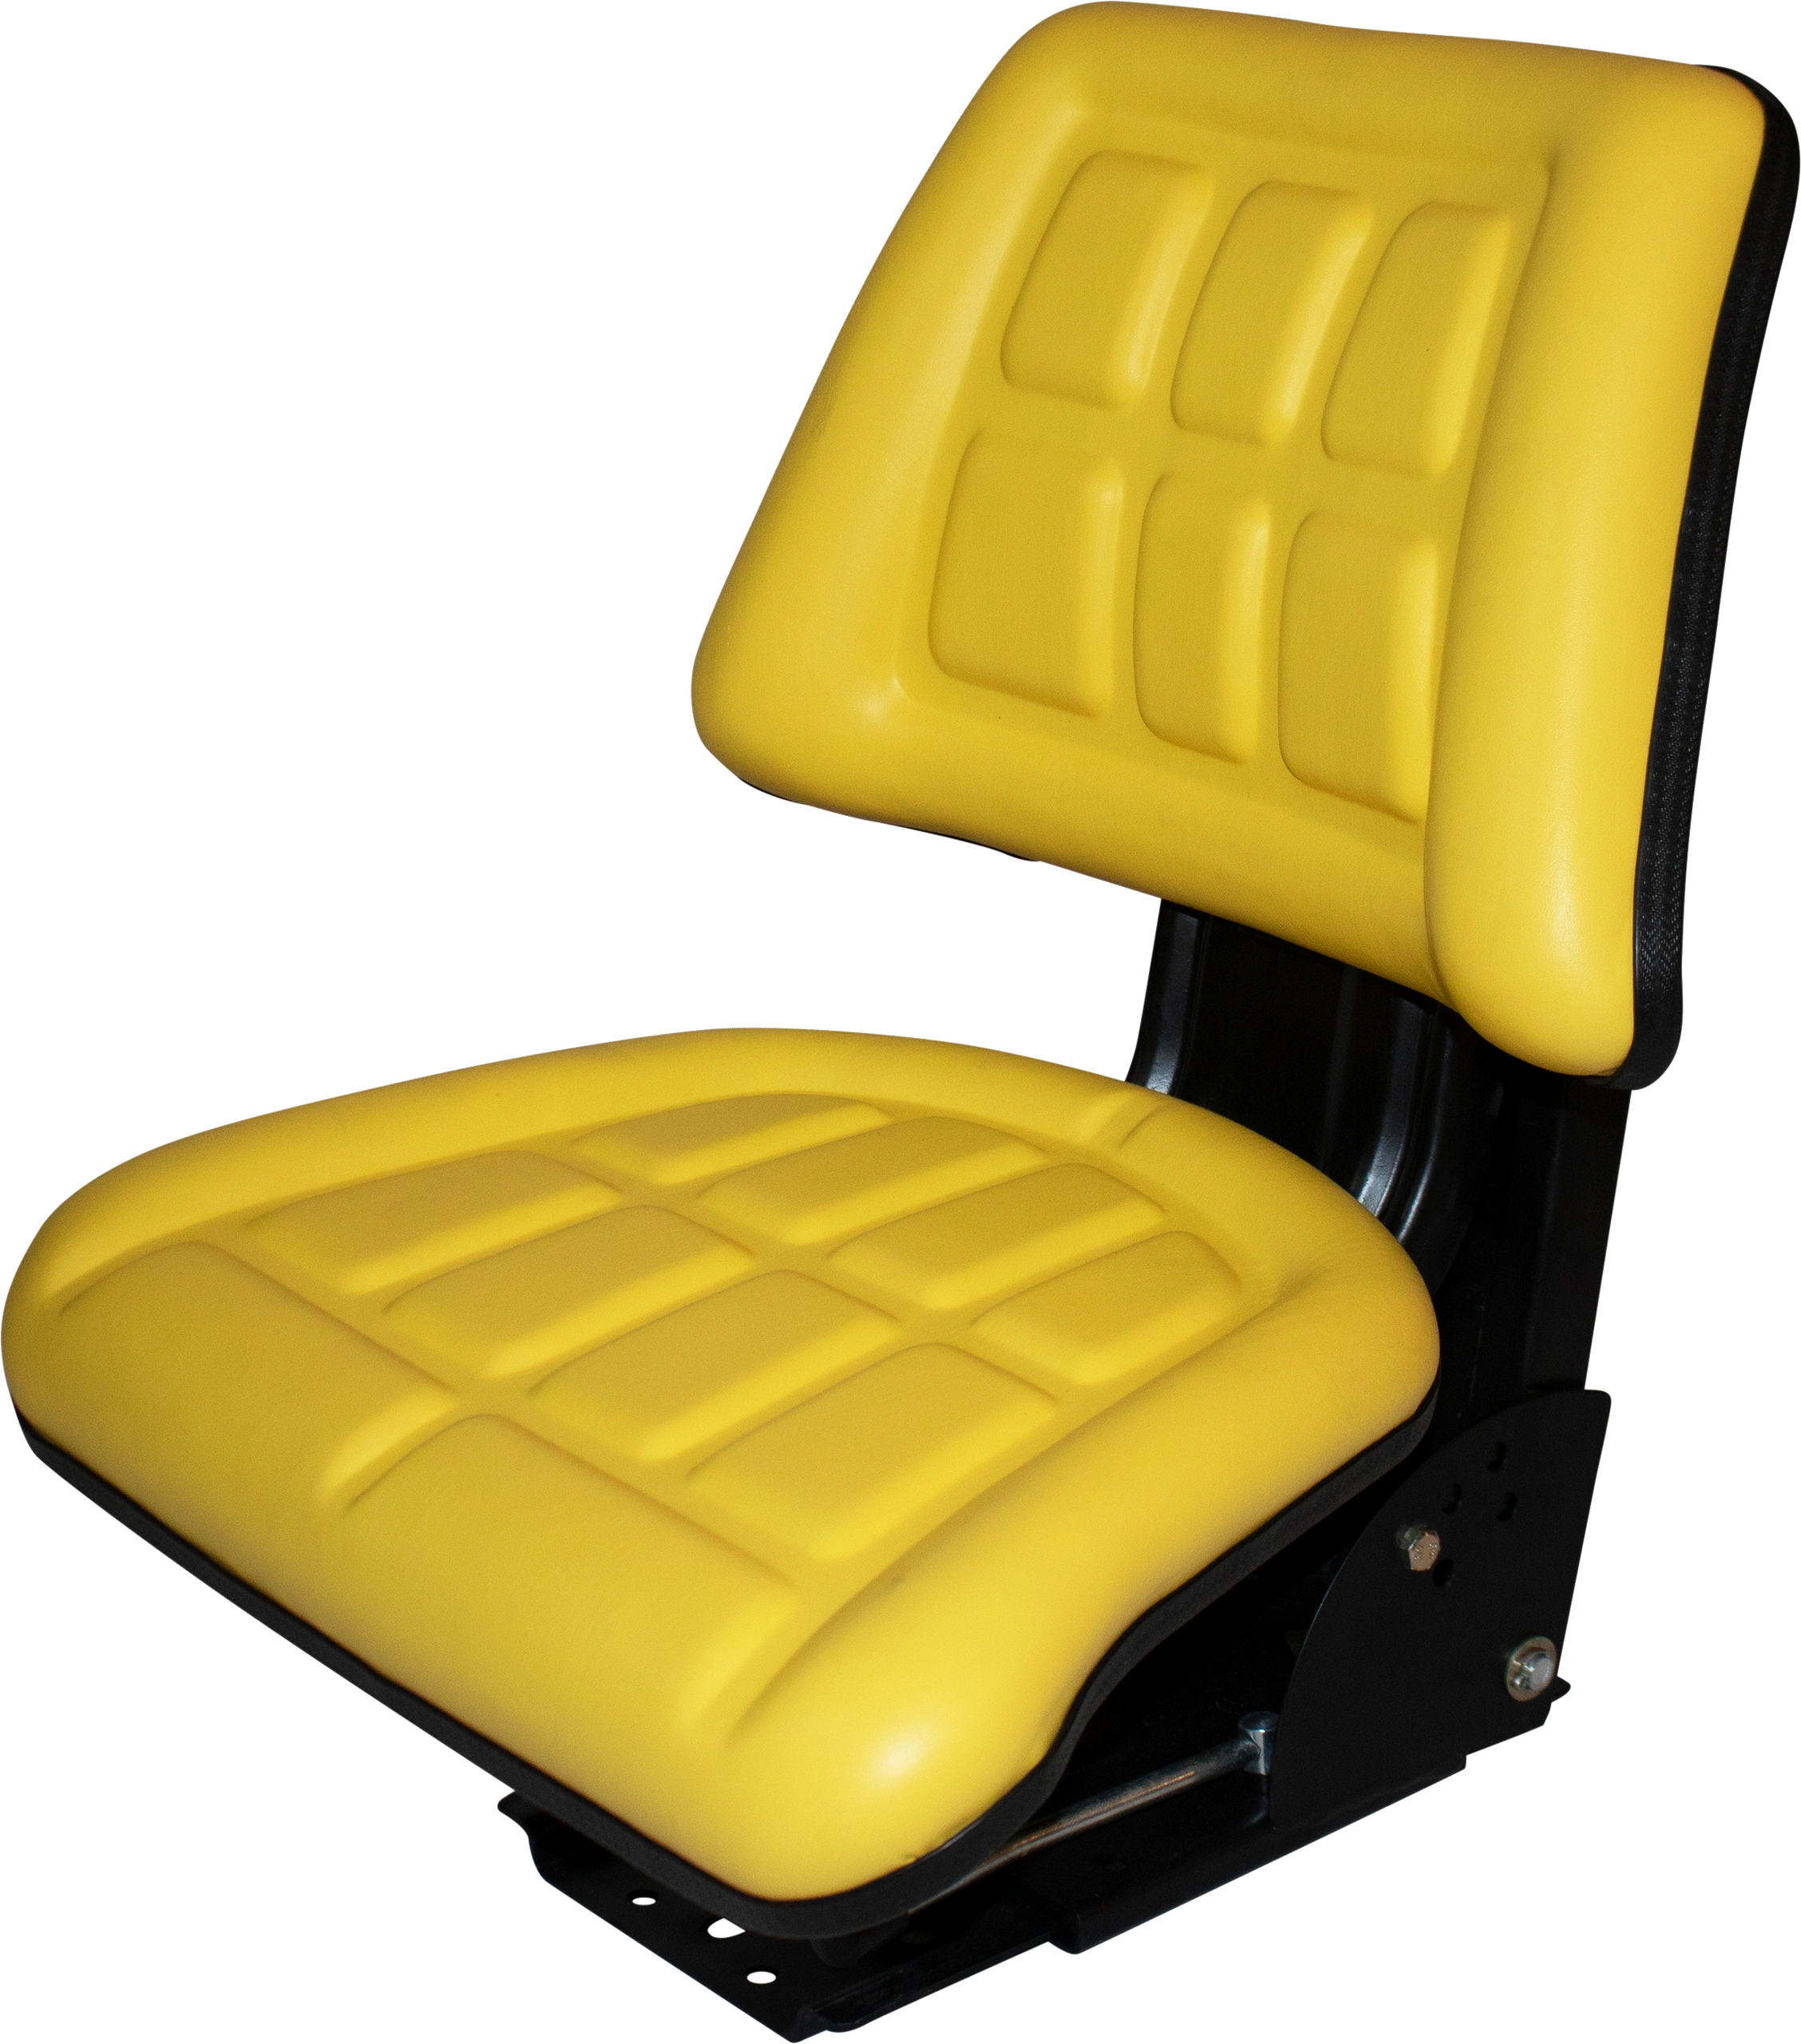 Same Day Shipping - GET IT Fast! View Our Transit MAP Yellow TRIBACK Style TRAC SEATS Brand Universal Tractor Suspension SEAT with TILT FITS John Deere 655 820 830 840 855 940 JD300 1020 1030 